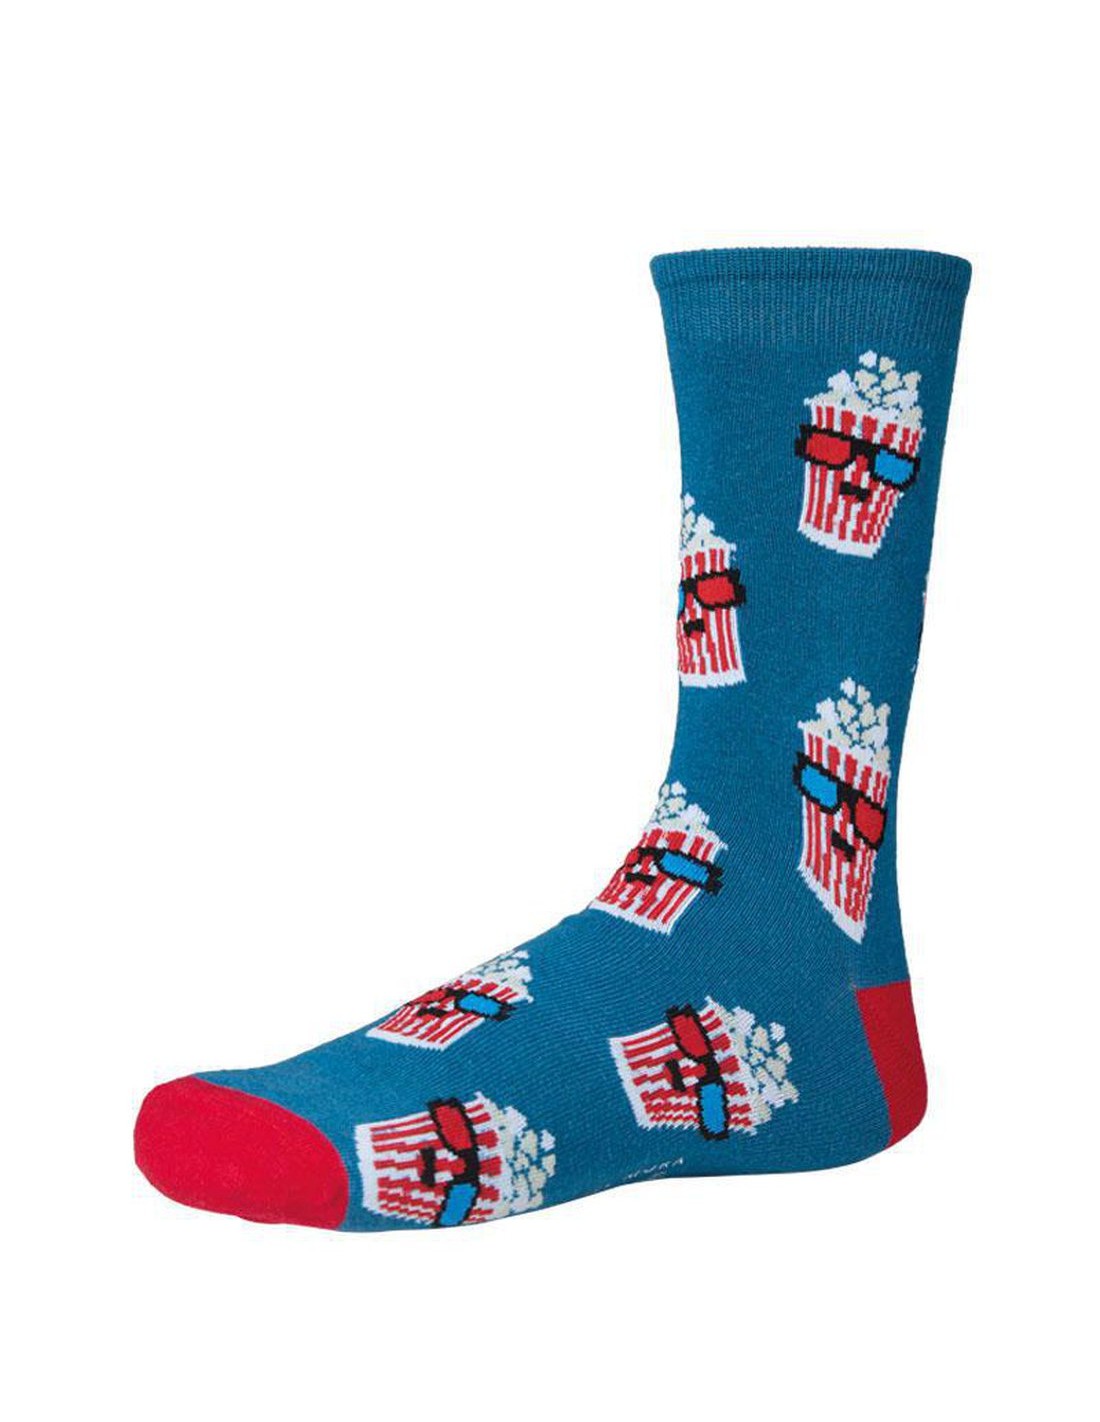 Ysabel Mora Popcorn Sock - Teal blue cotton ankle socks with personified buckets of popcorn wearing 3D glasses, red coloured heel and toe.